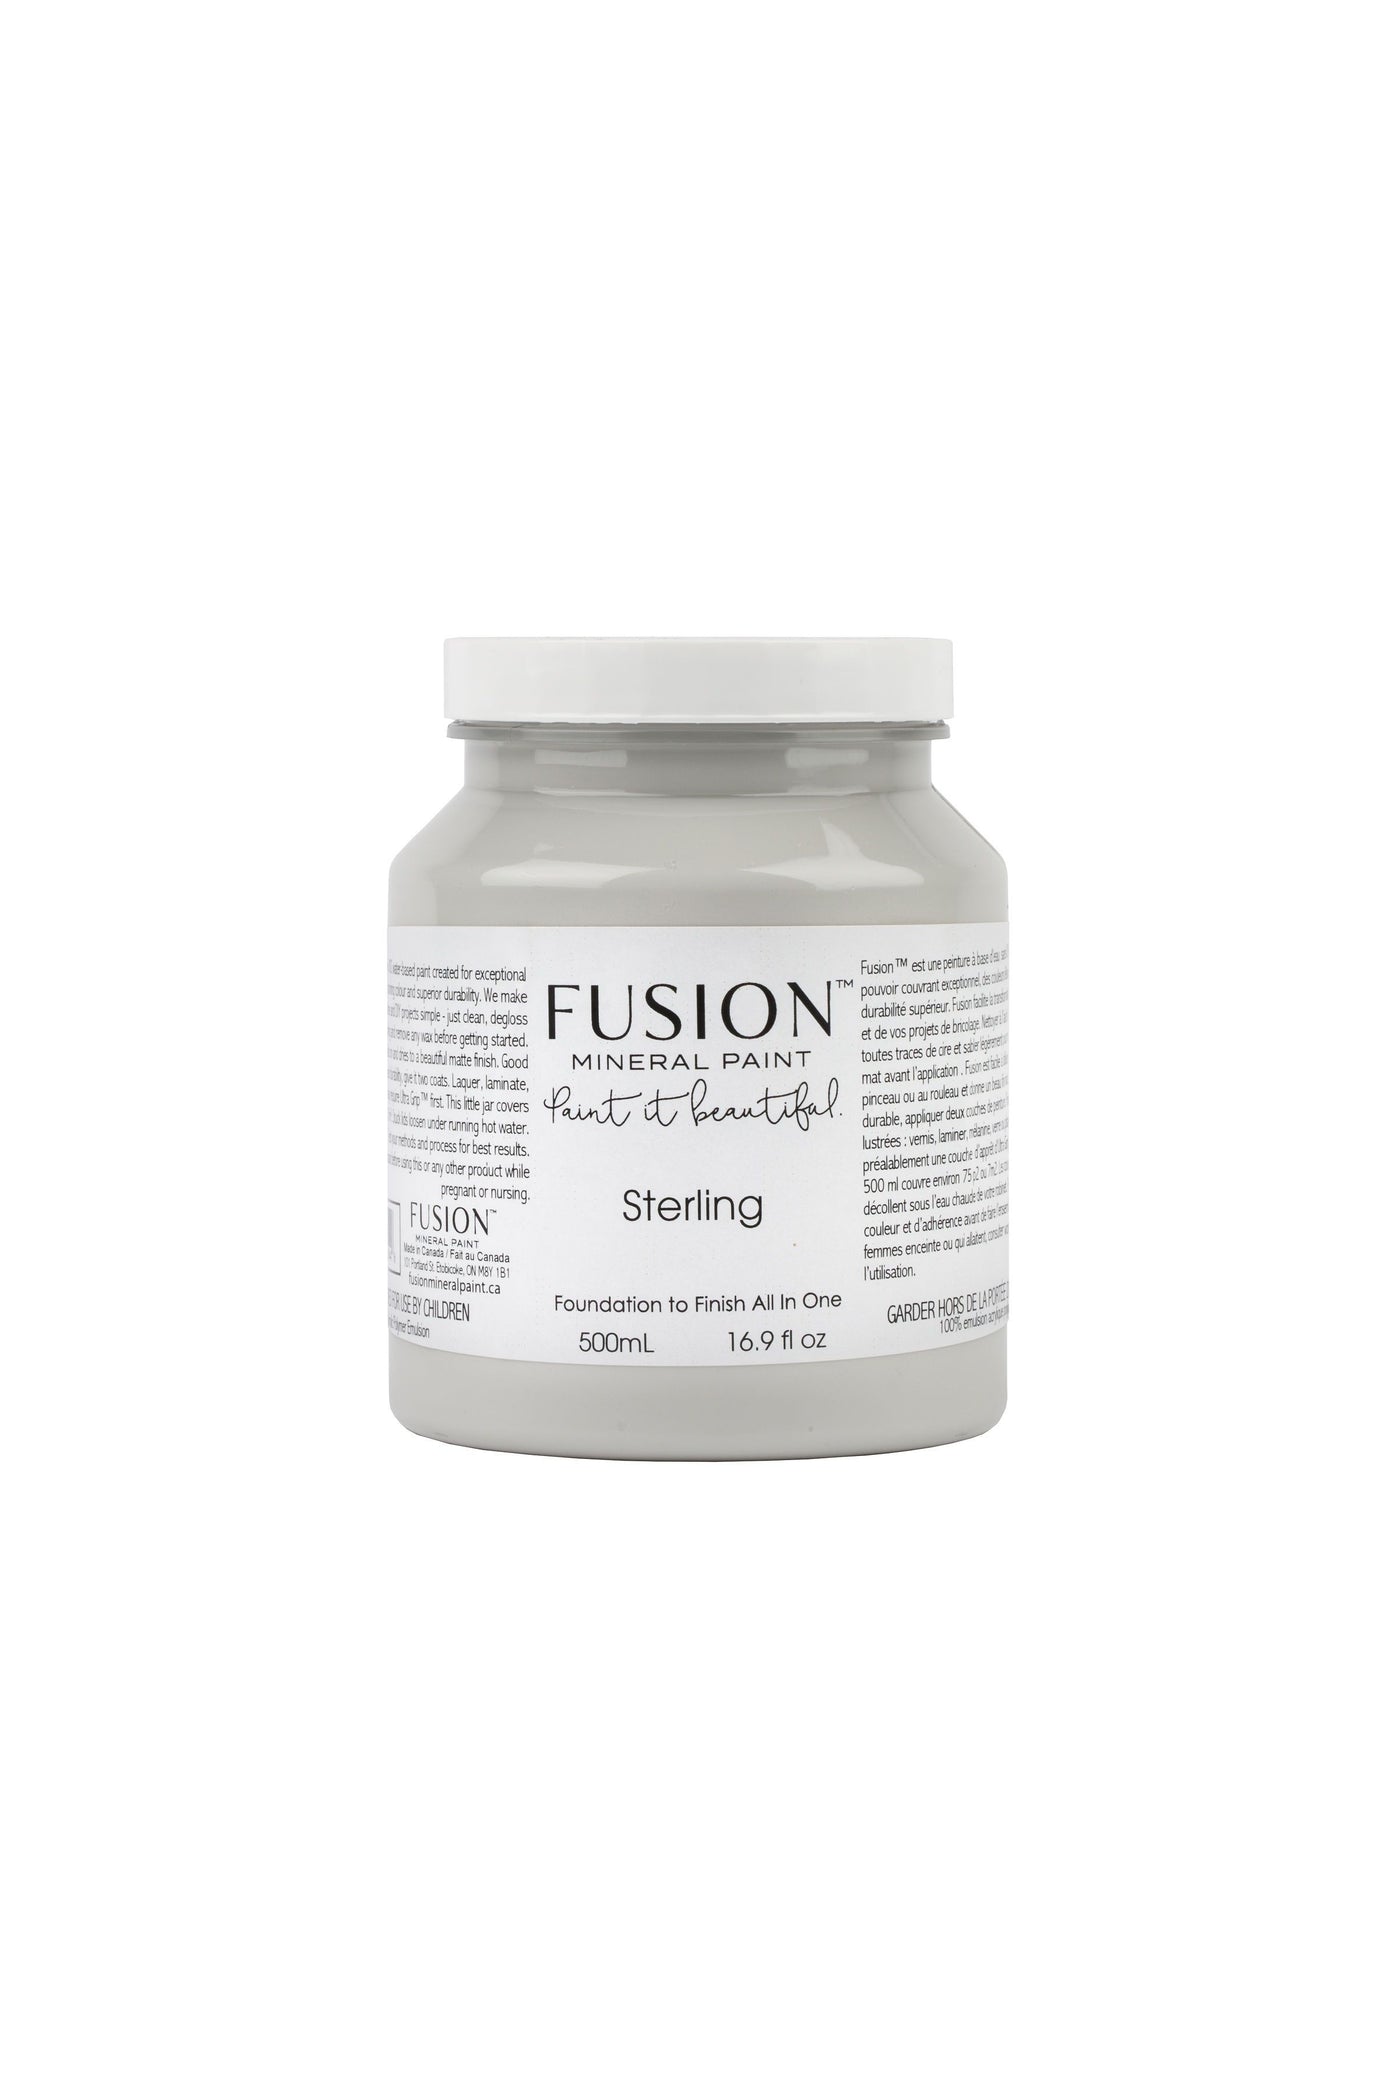 Fusion Mineral Paint - STERLING light cool grey 500ml